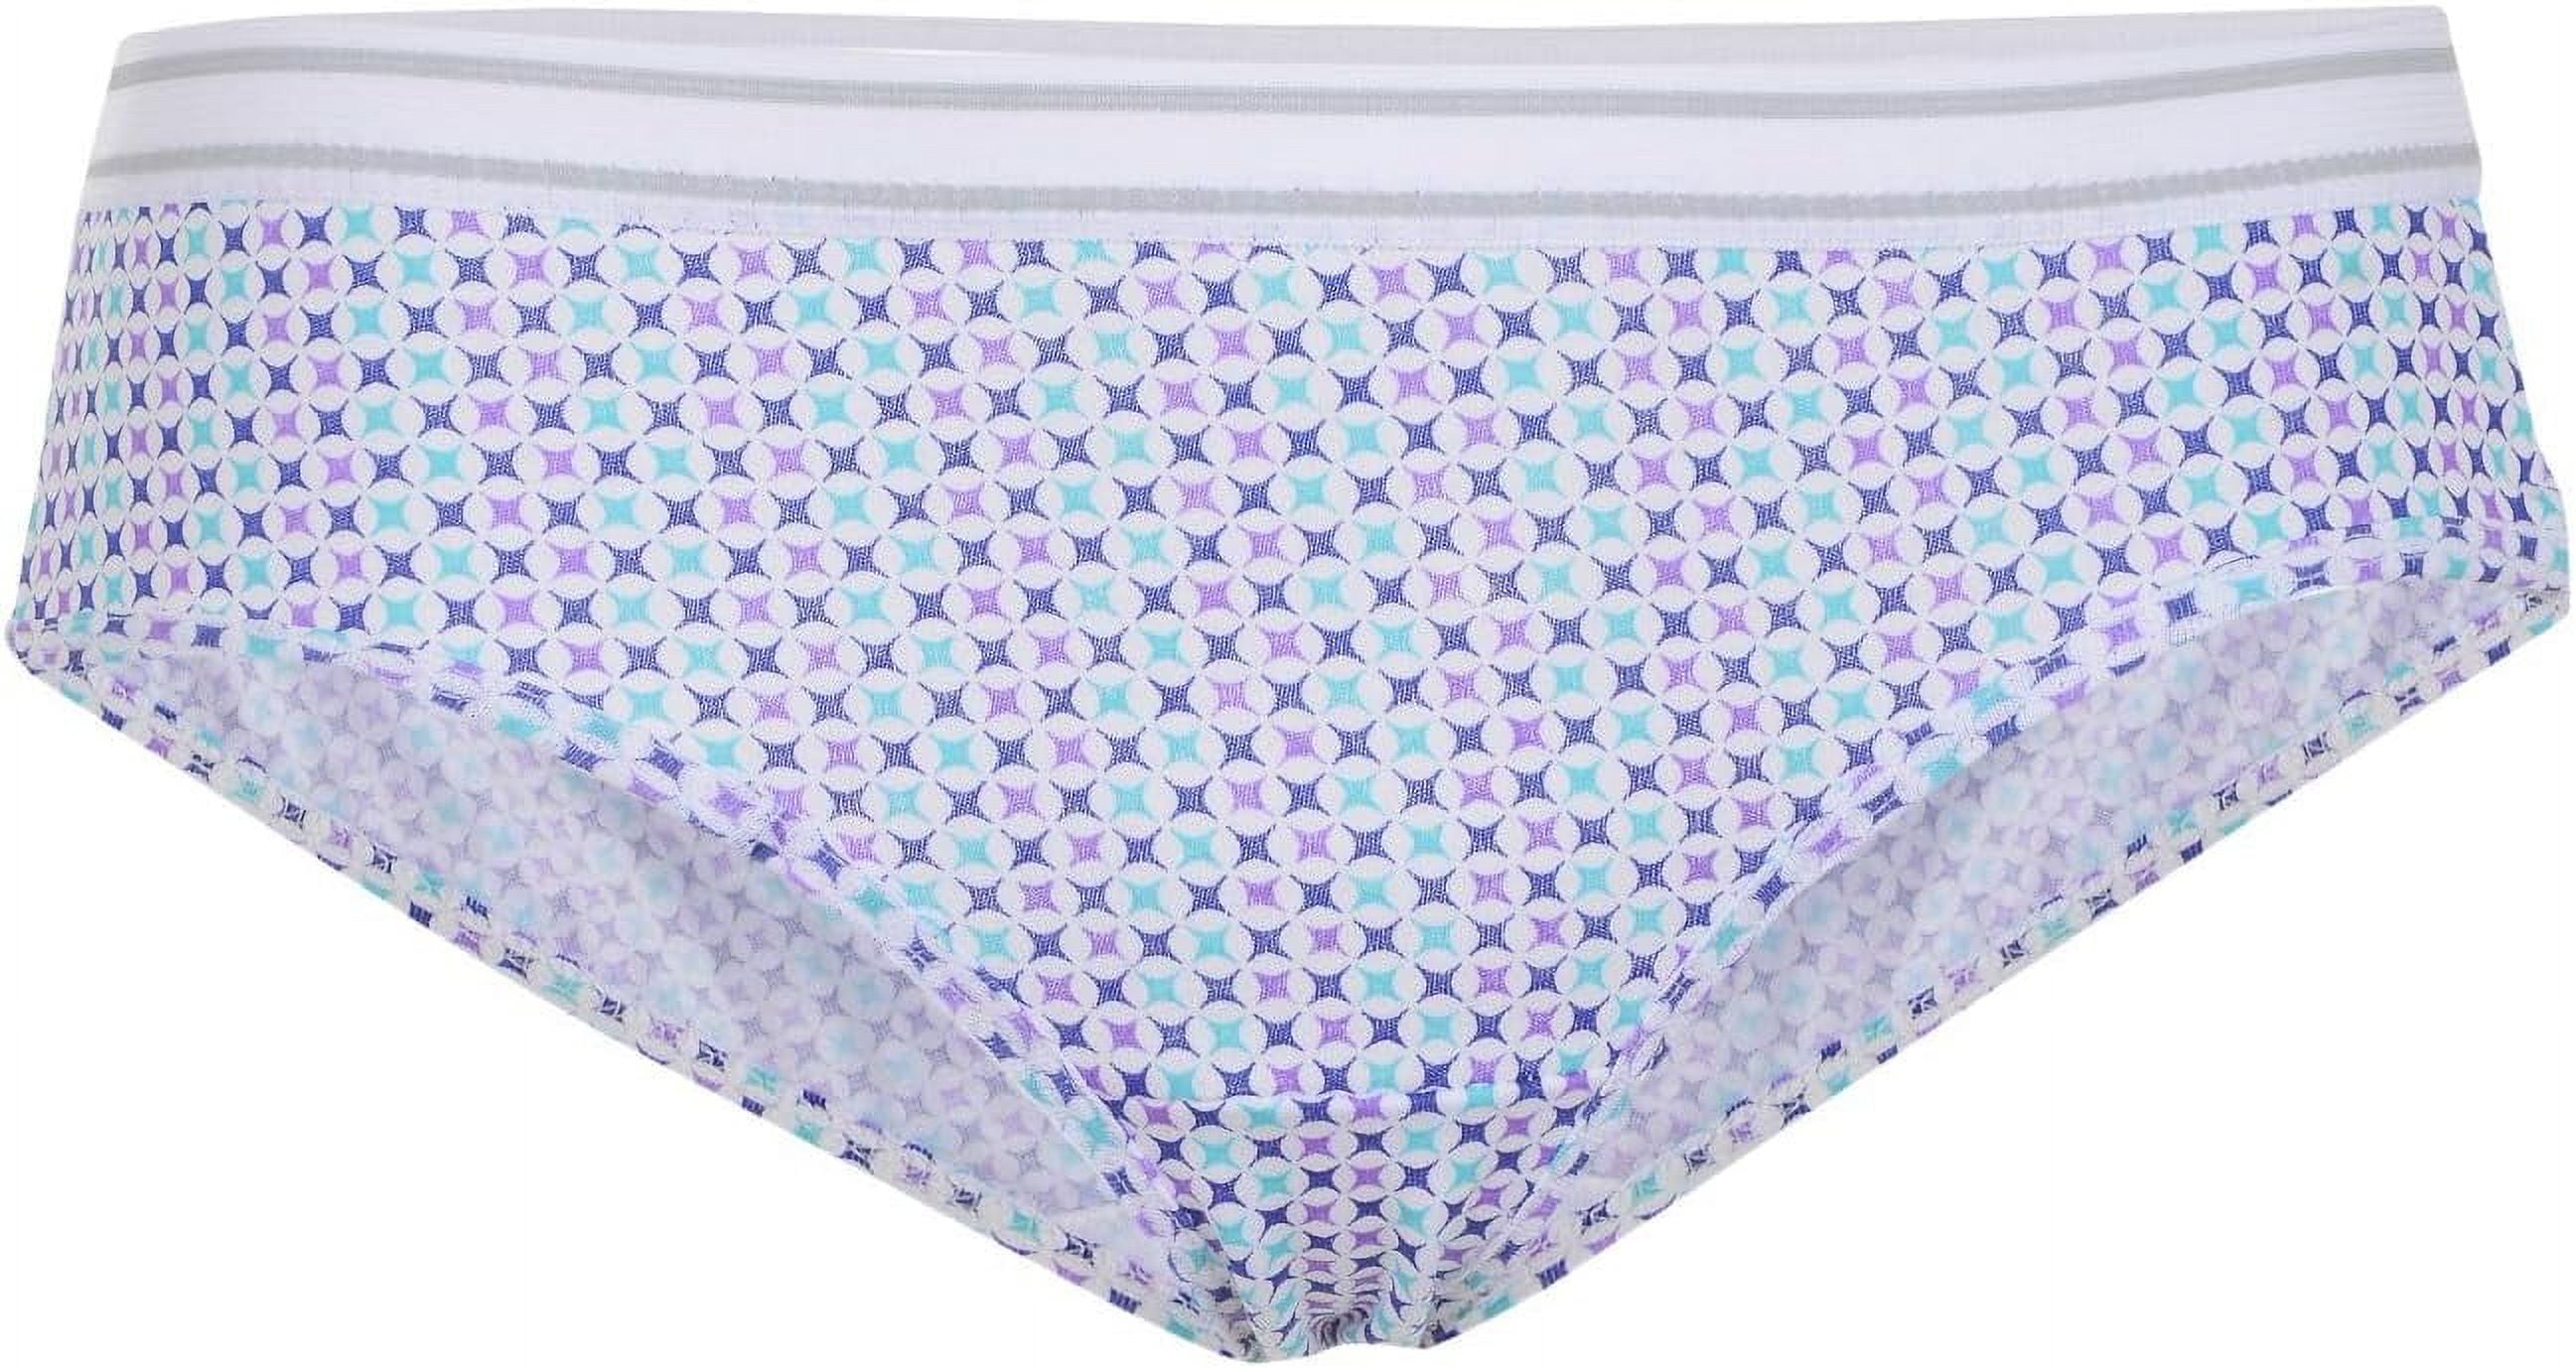 Buy Hanes Women's Cool Comfort Cotton Sporty Hipster Panties 6-Pack,  Blue/Grey Assortment, 6 at